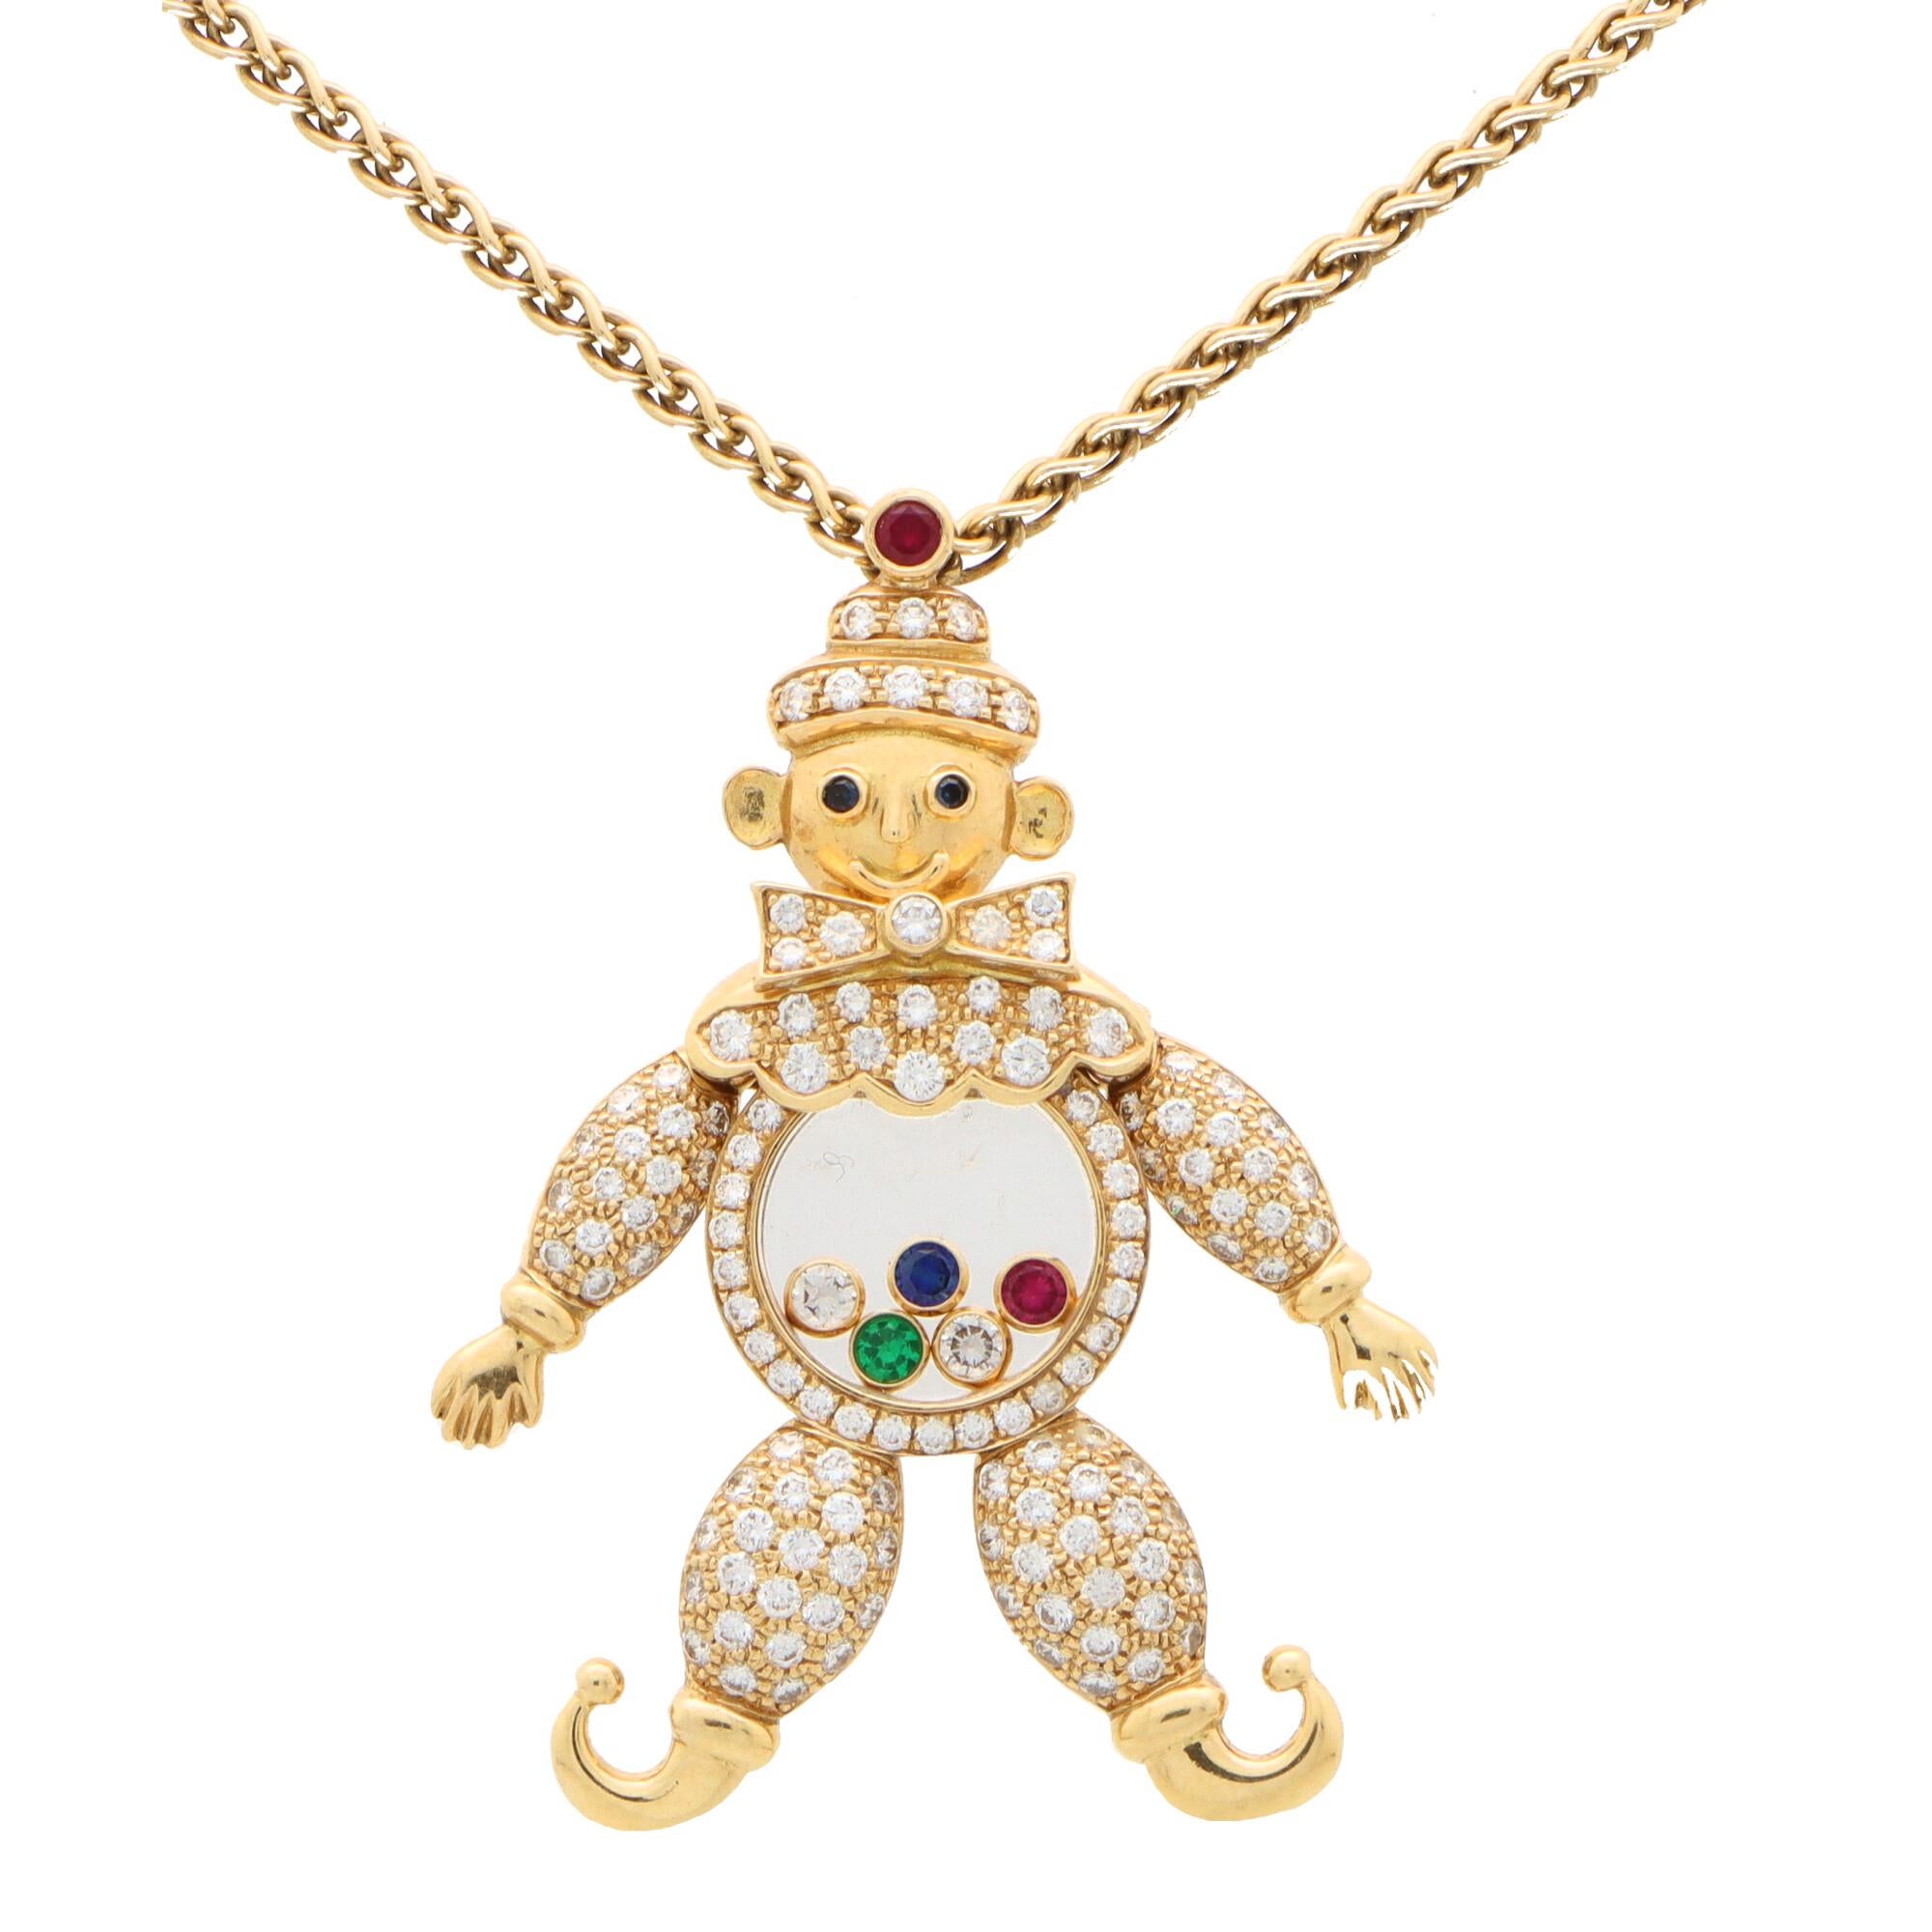 Modern Vintage Chopard 'Happy Clown' Pendant Necklace with Diamonds in 18k Yellow Gold